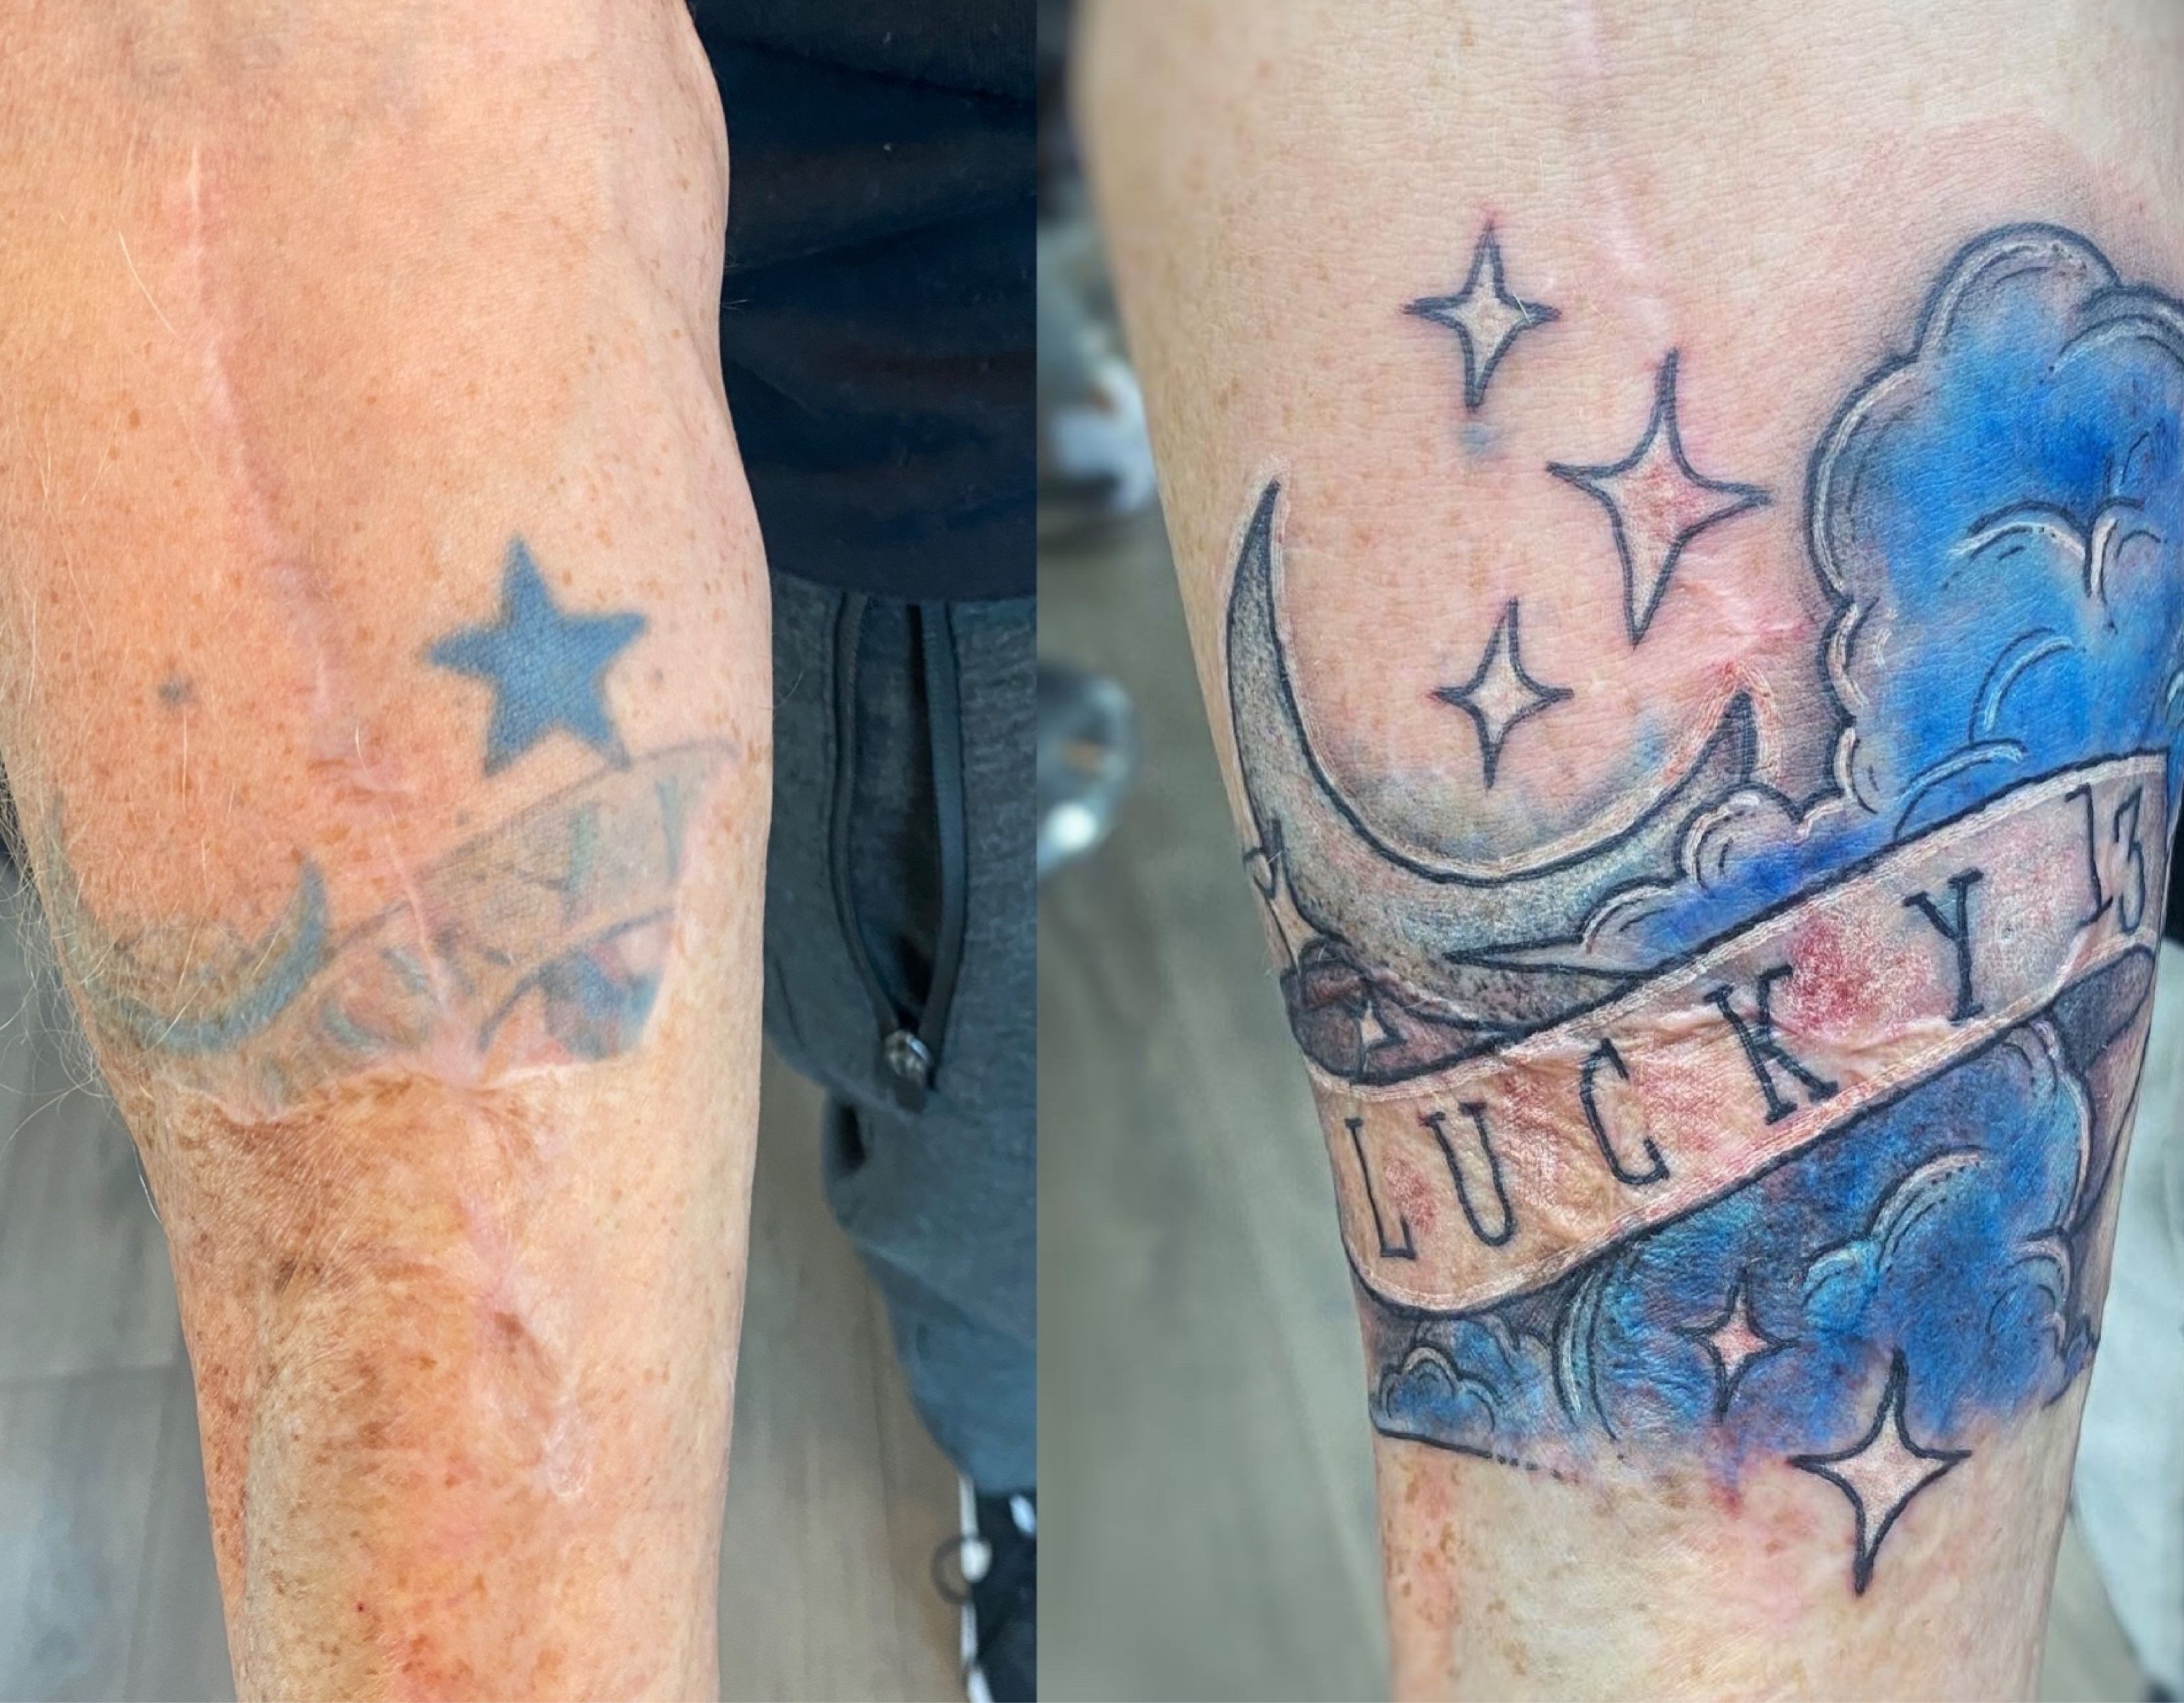 Tattoo Removal Results  Before and After Pictures